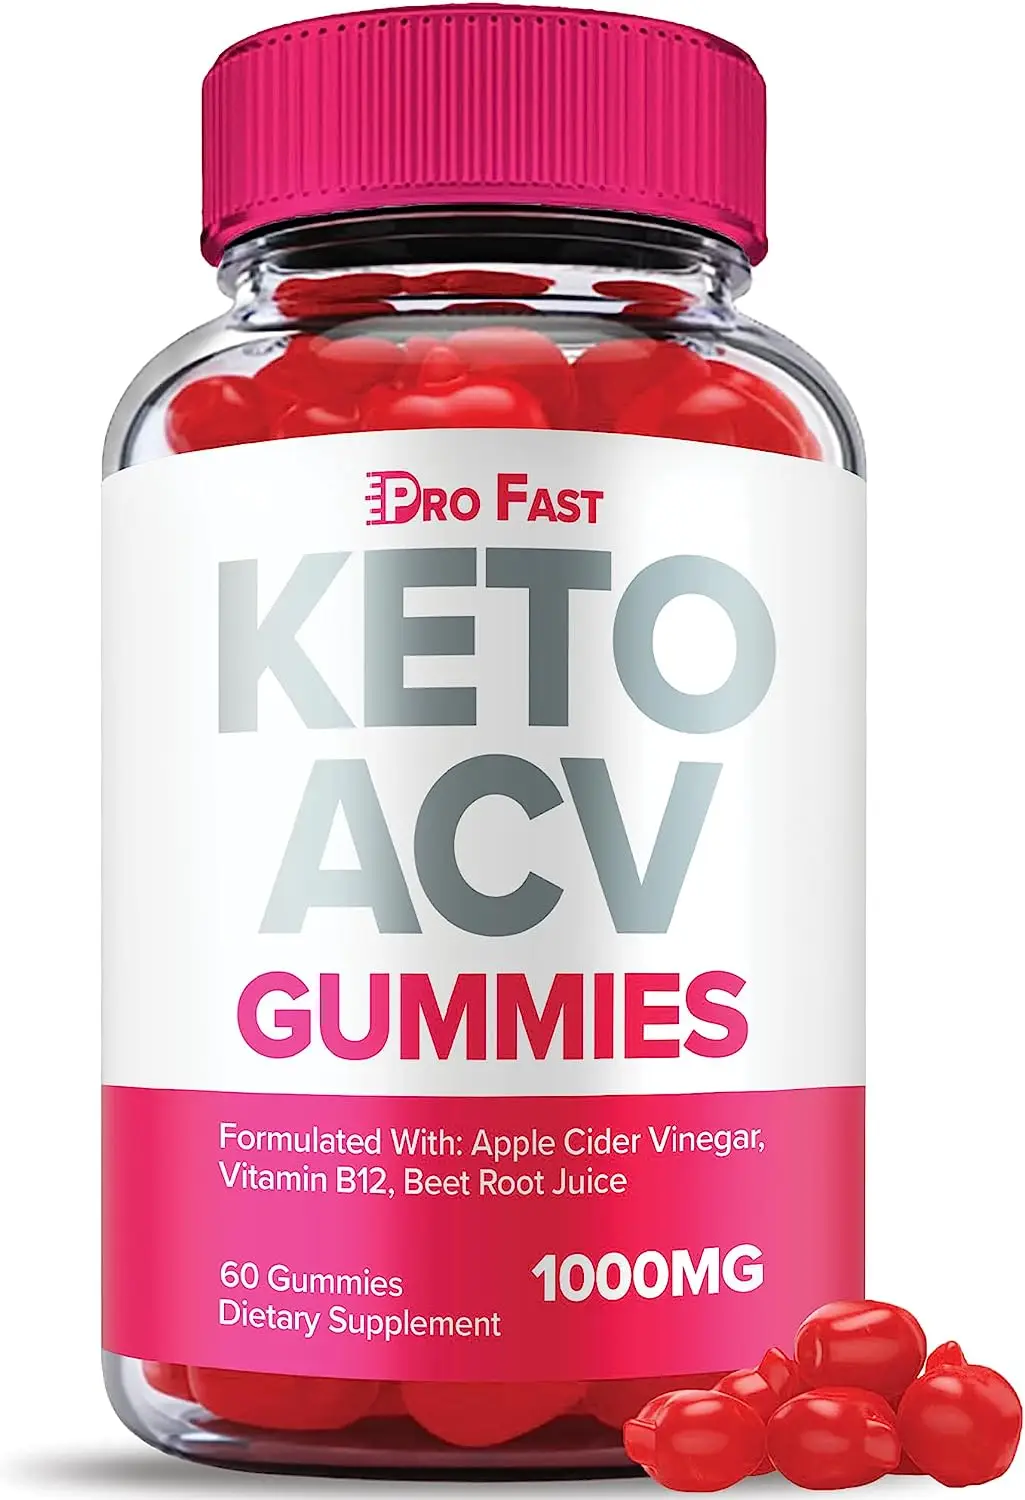 You are currently viewing Profast Keto Acv Gummies Scam Explained